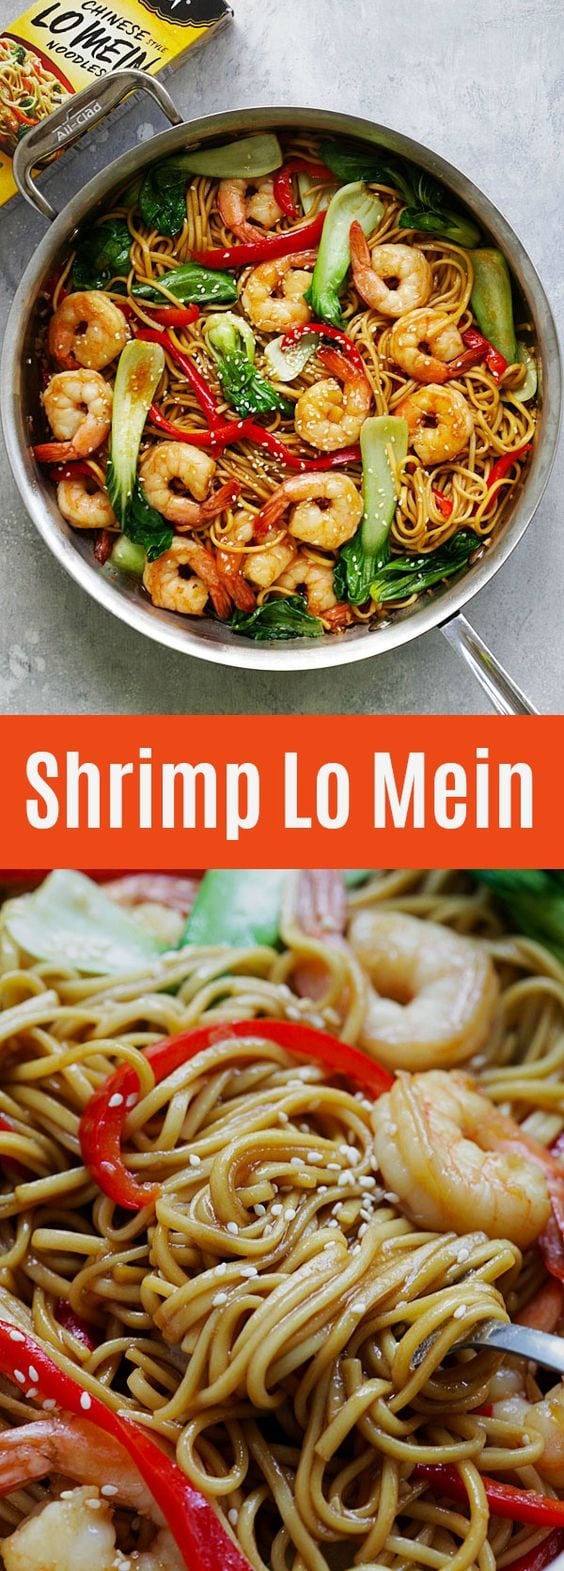 Shrimp Lo Mein - the best and most delicious Shrimp Lo Mein recipe ever! Made with Simply Asia Chinese Style Lo Mein Noodles, it's better than Chinese restaurants | rasamalaysia.com